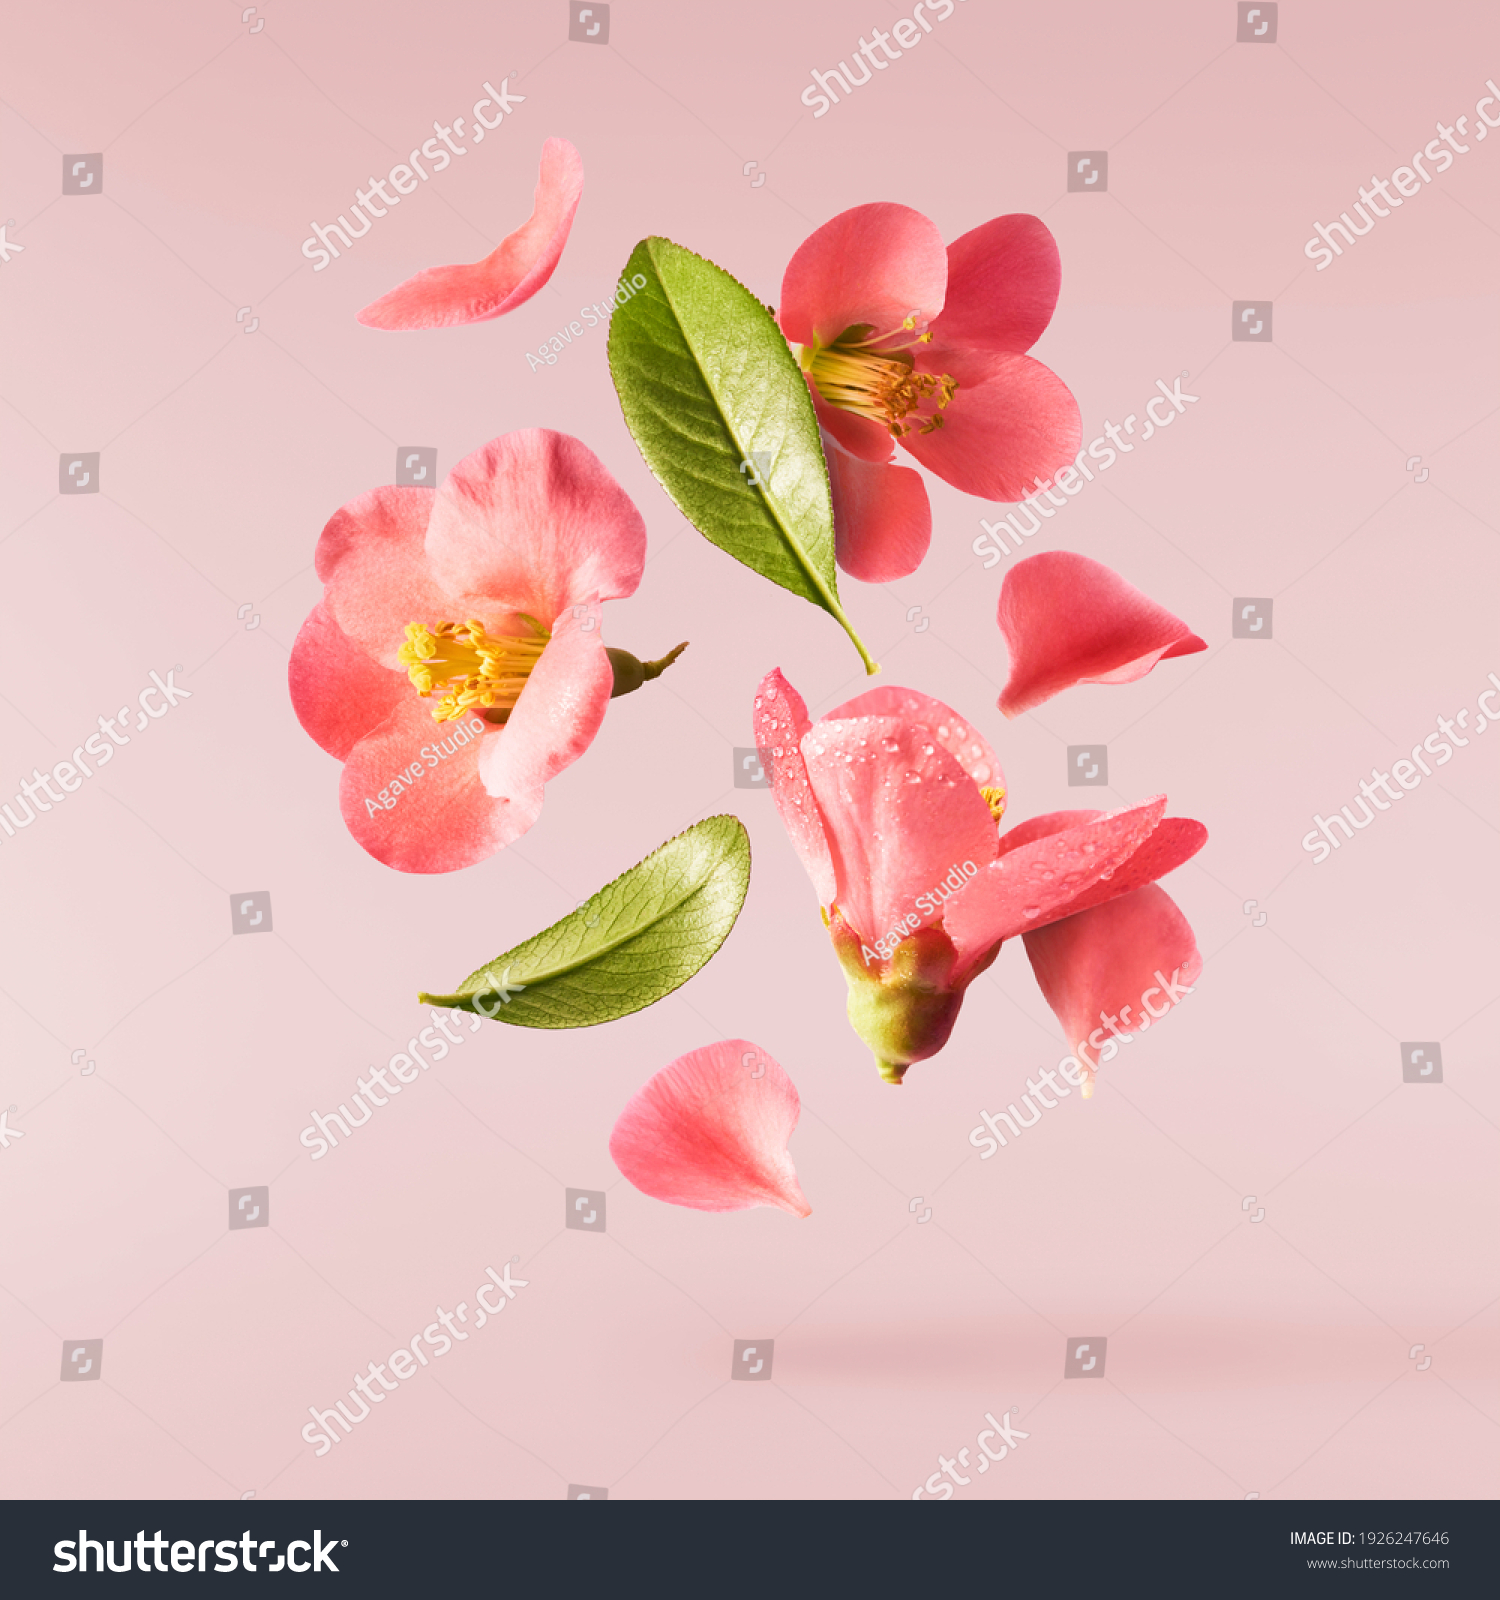 A beautiful image of sping pink flowers flying in the air on the pastel pink background. Levitation conception. Hugh resolution image #1926247646